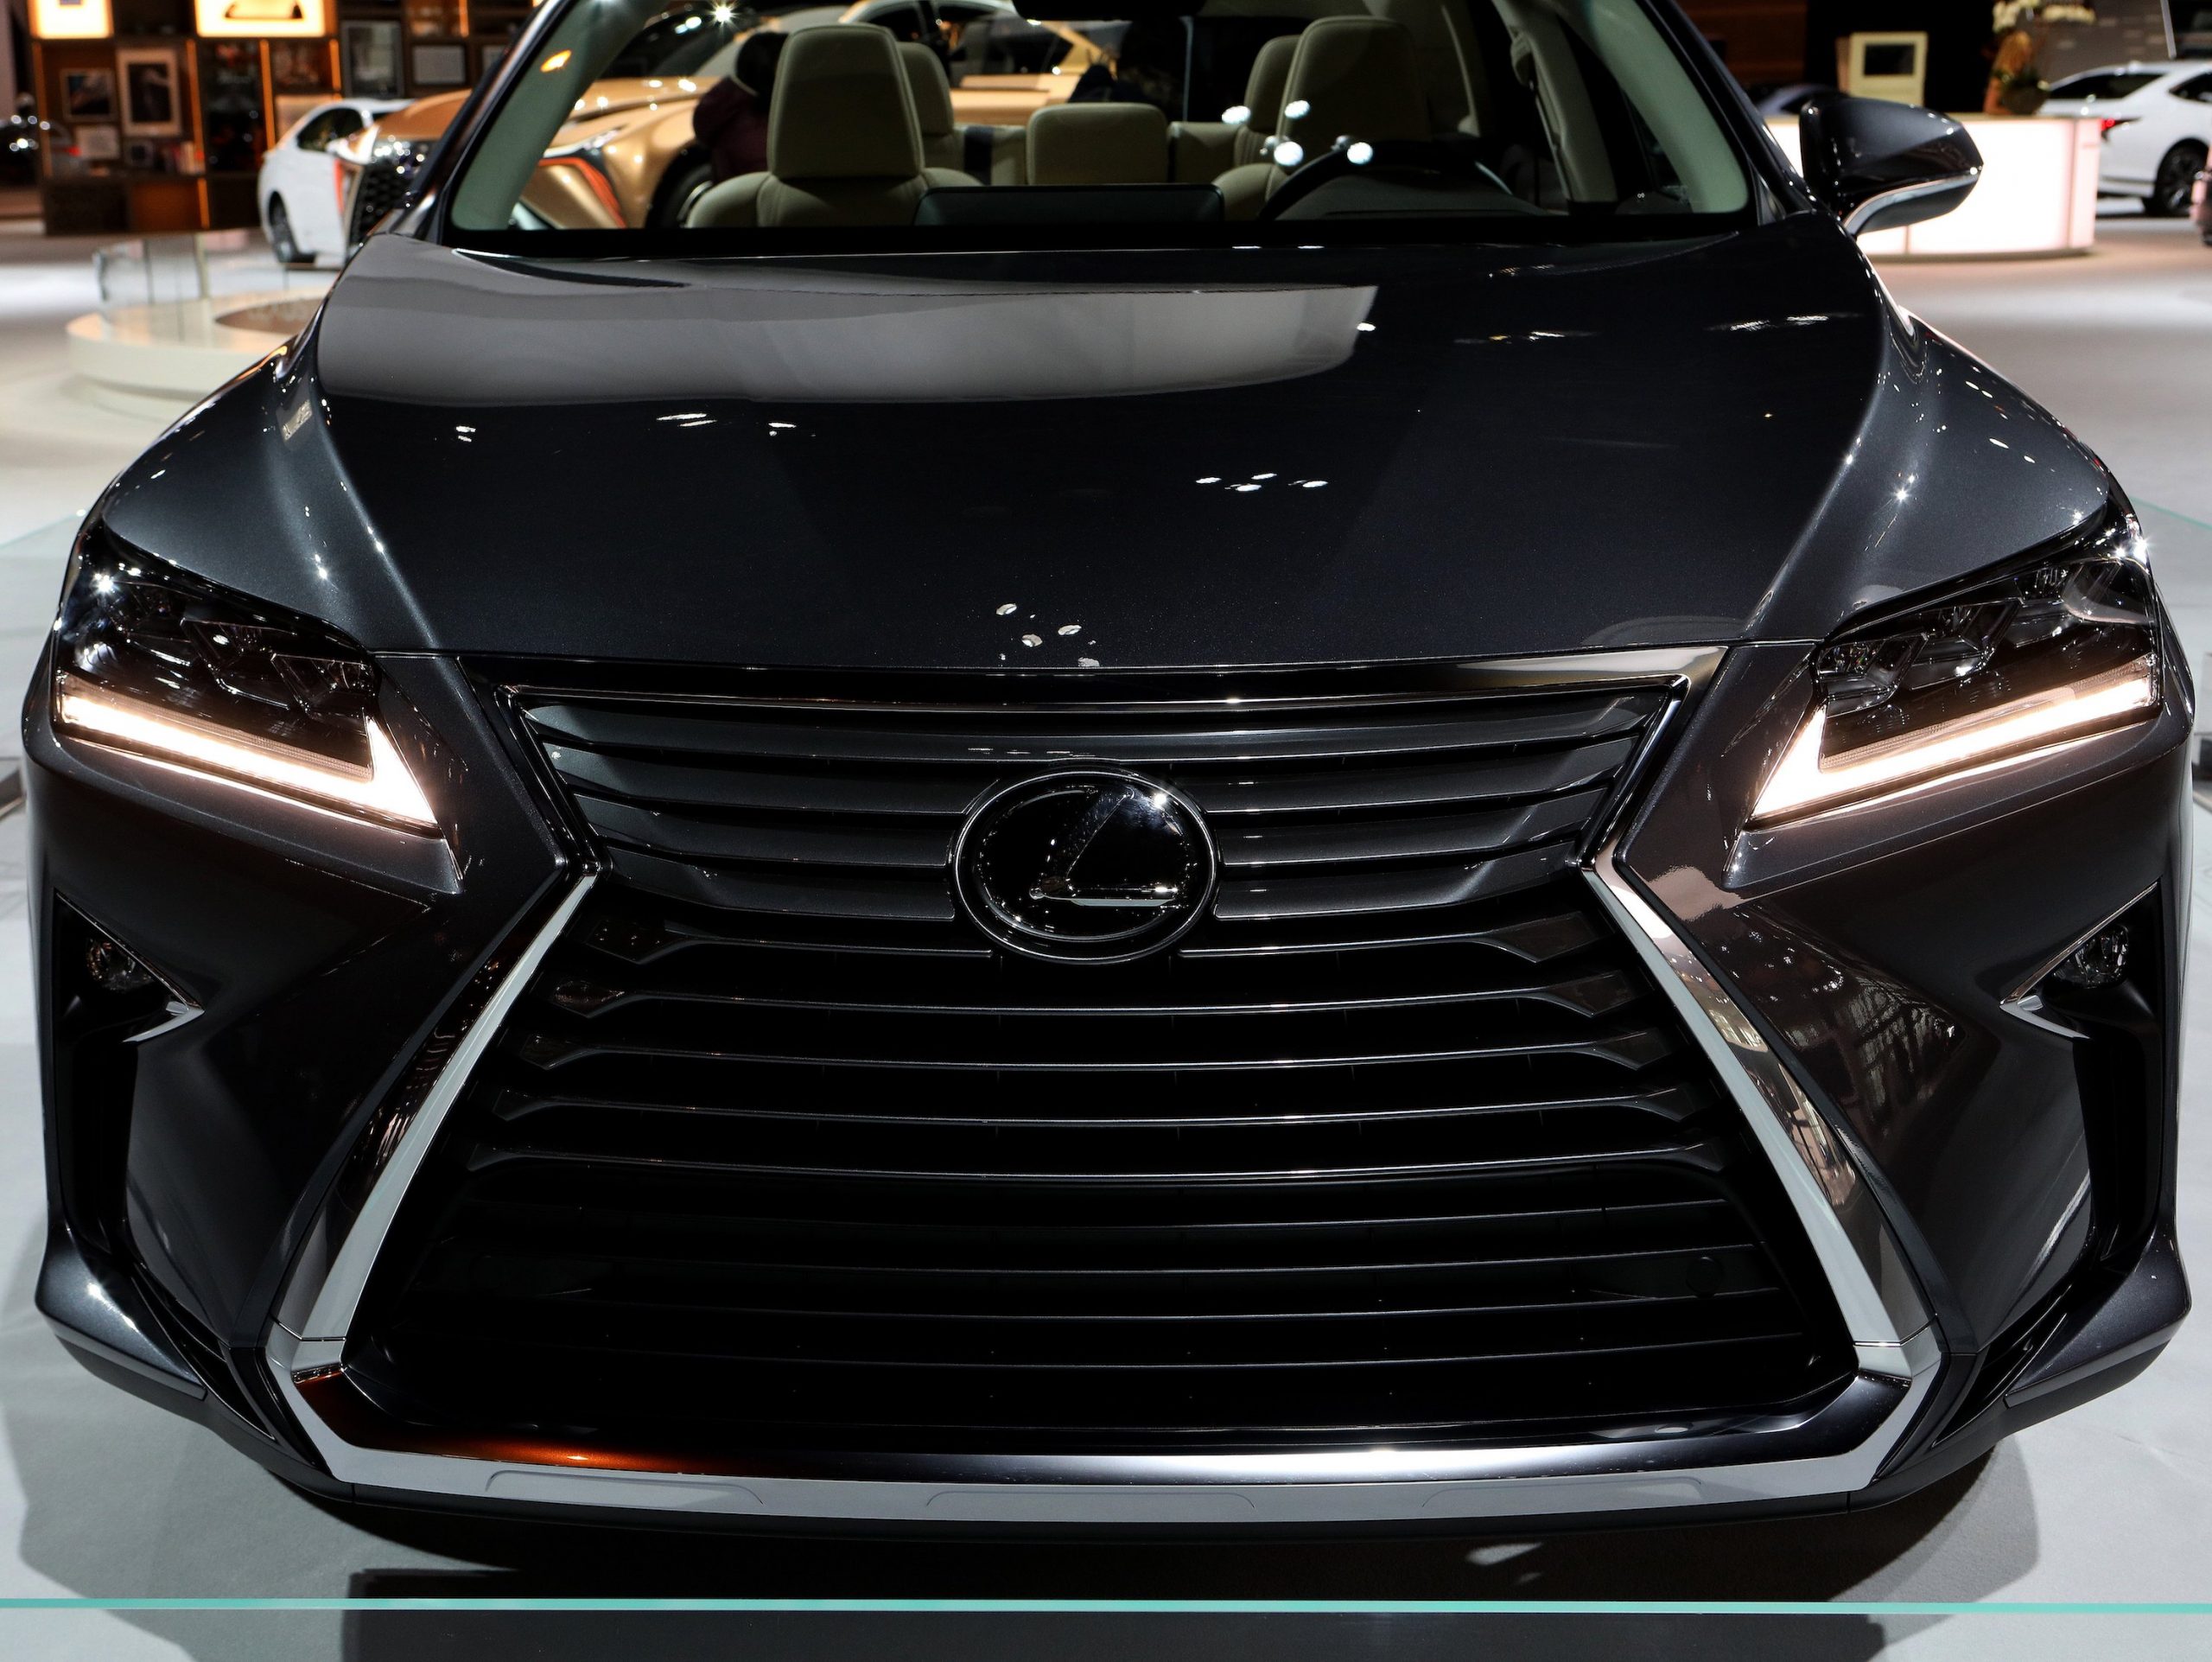 2018 Lexus RX 350L is on display at the 110th Annual Chicago Auto Show